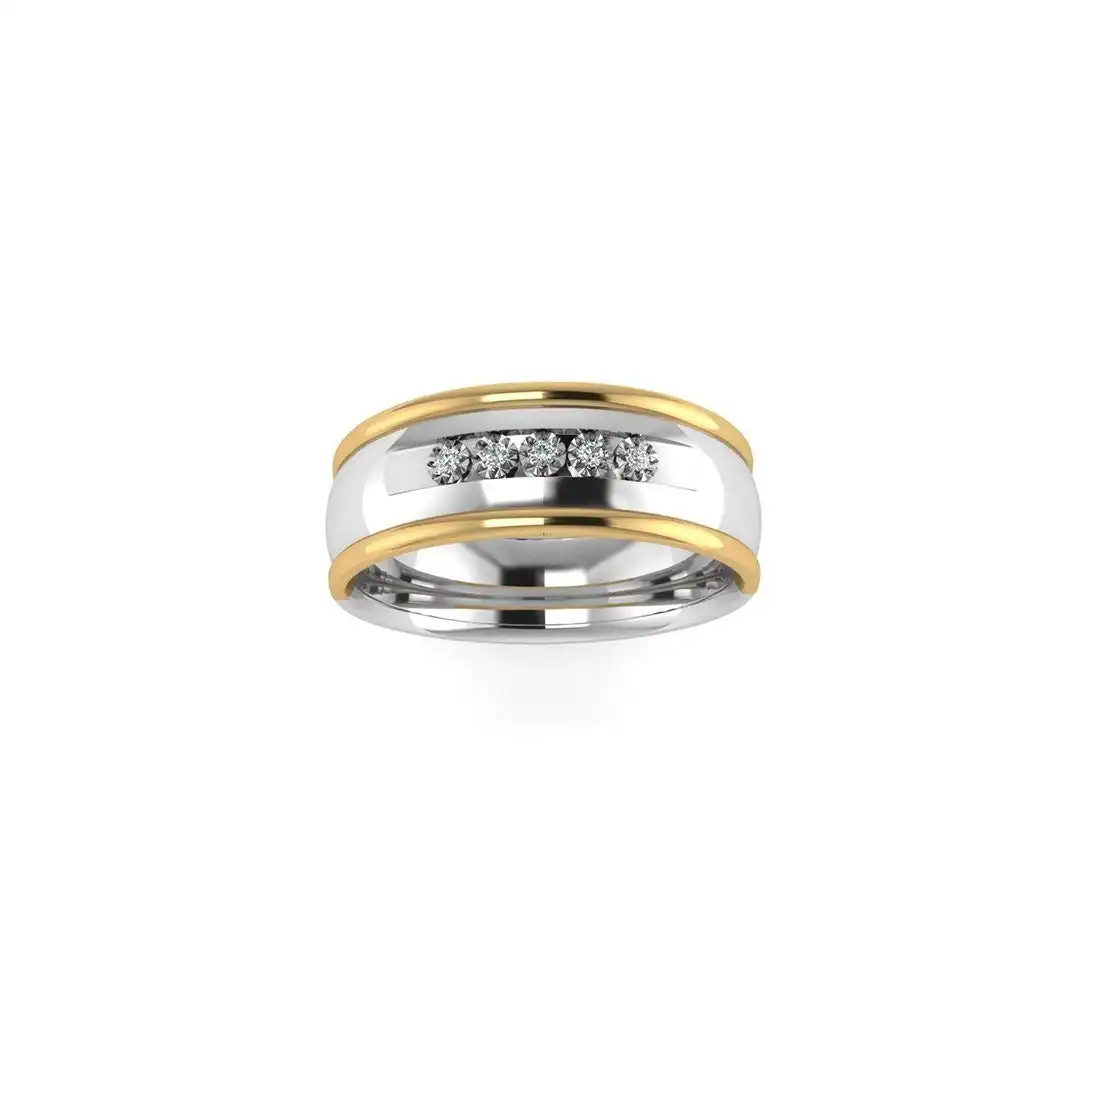 Sterling Silver & 9ct Yellow Gold Men's Ring